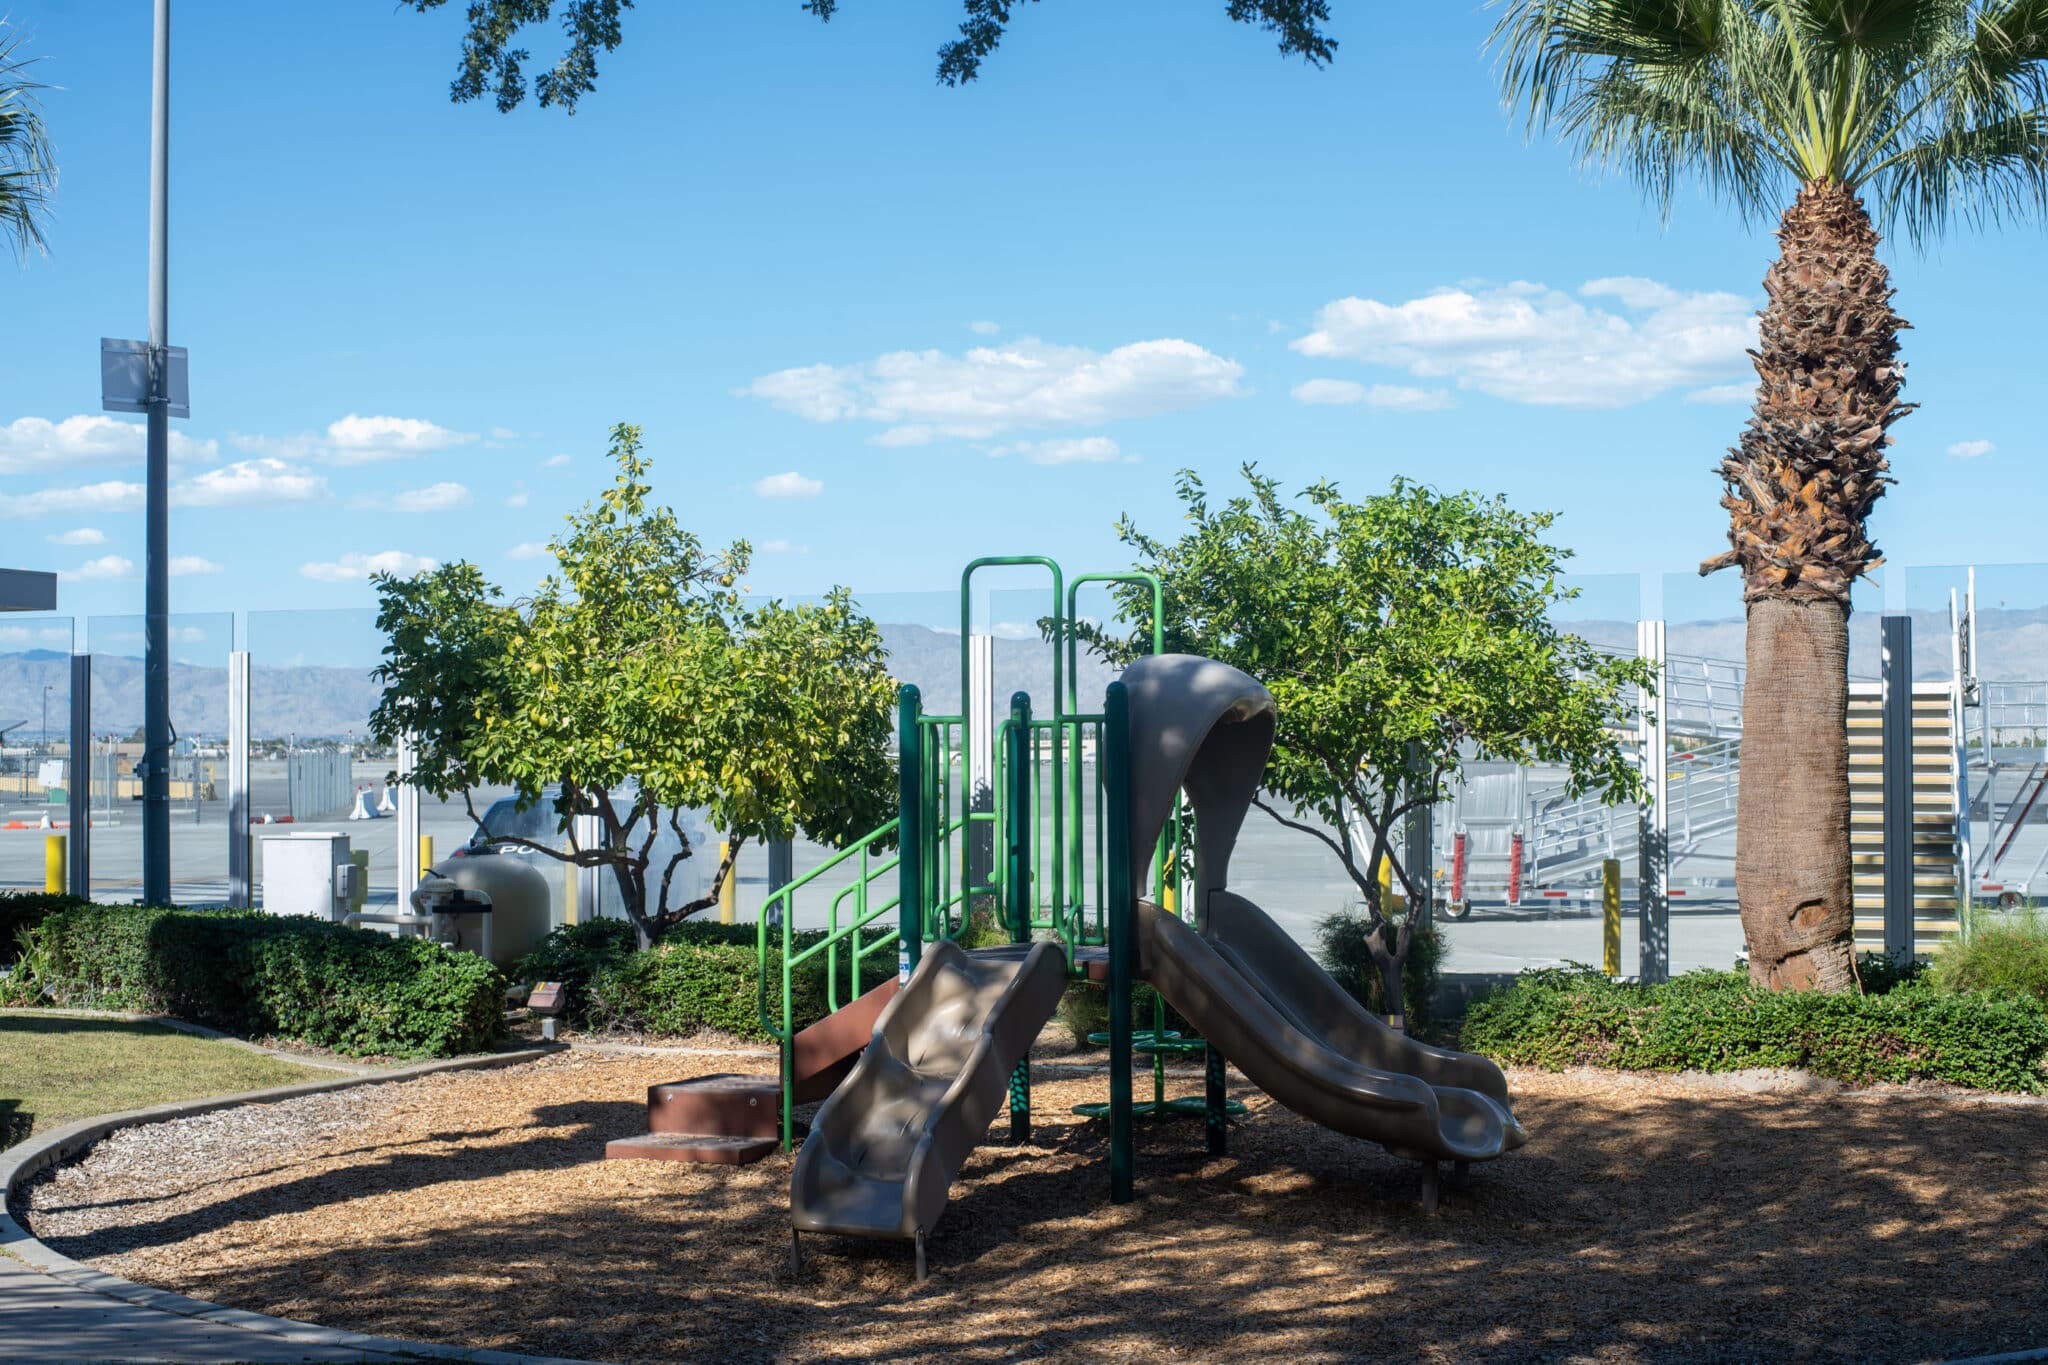 A playground with two slides and green railings, surrounded by trees and wood chips, with a palm tree on the right and mountains in the distance under a blue sky.